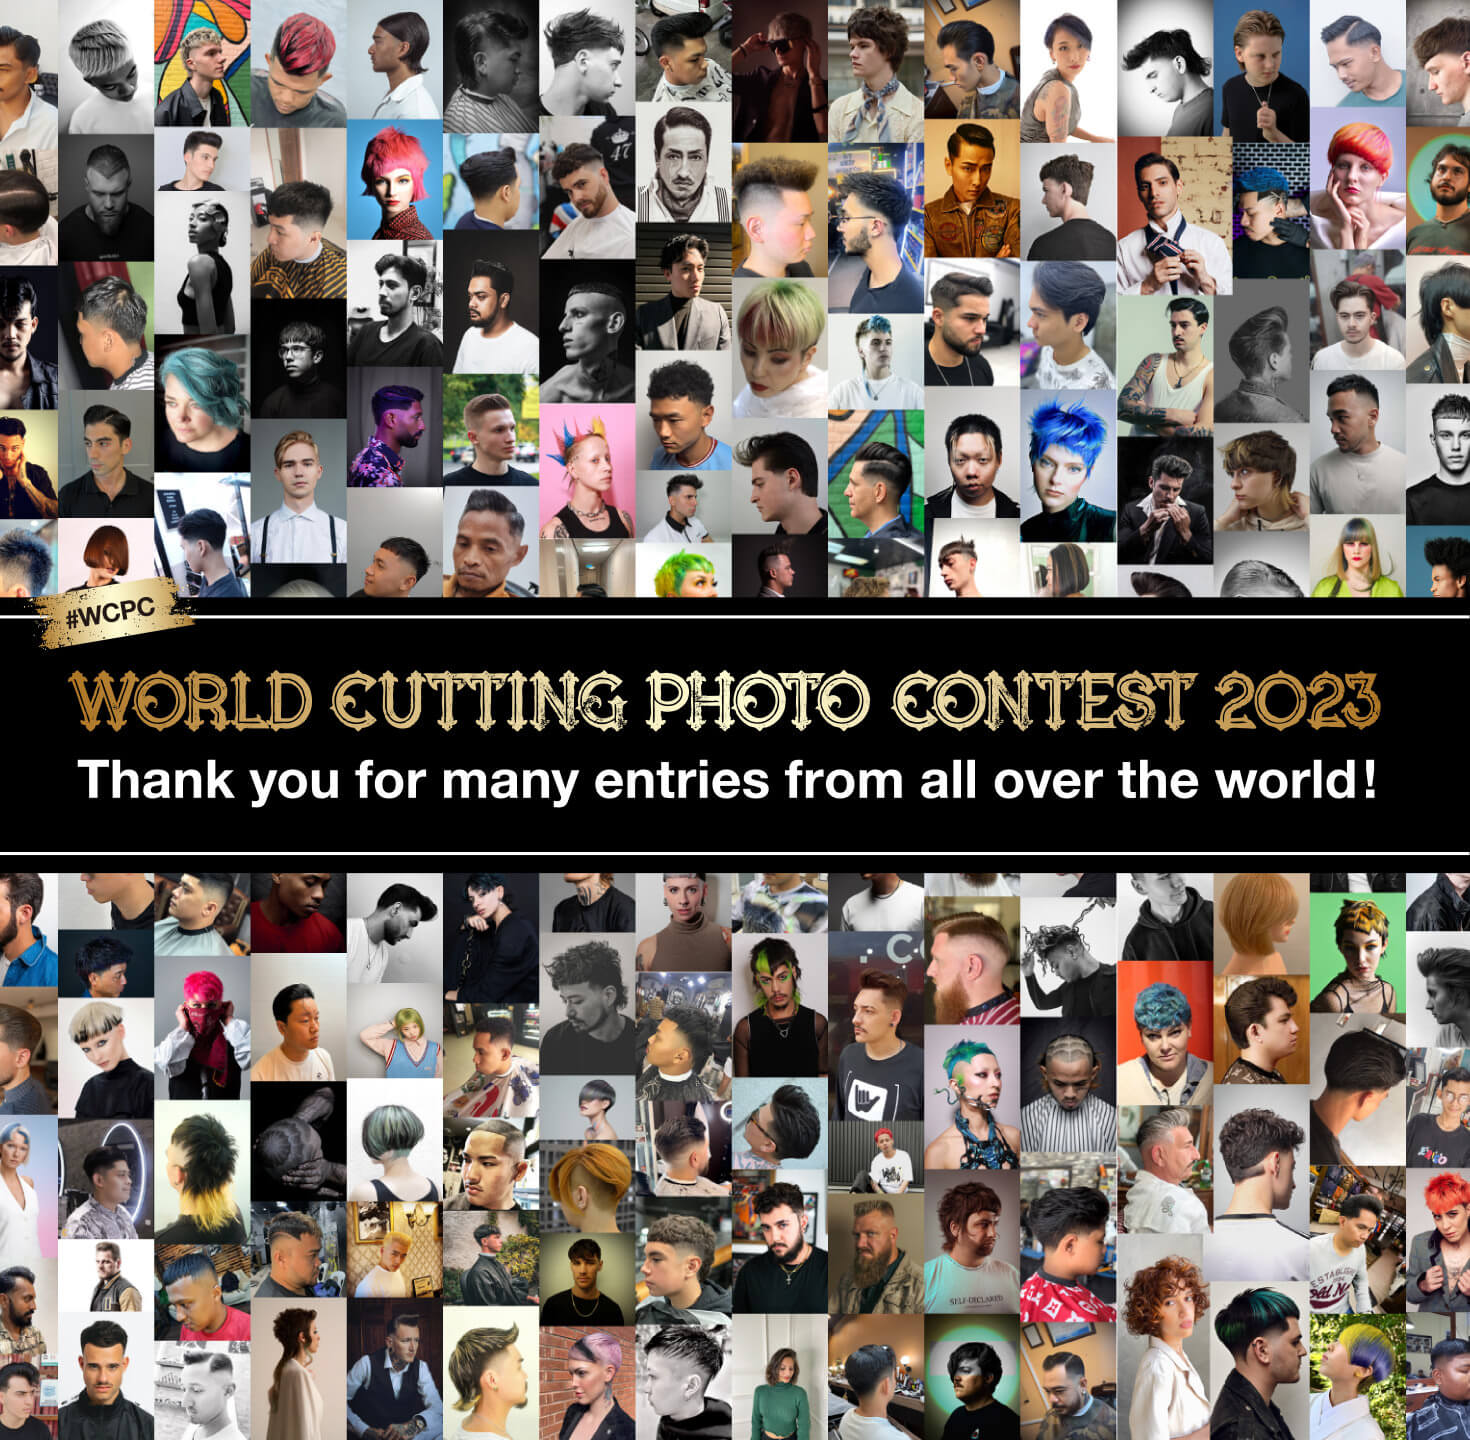 WORLD CUTTING PHOTO CONTEST 2023 Thank you for many entries from all over the world!